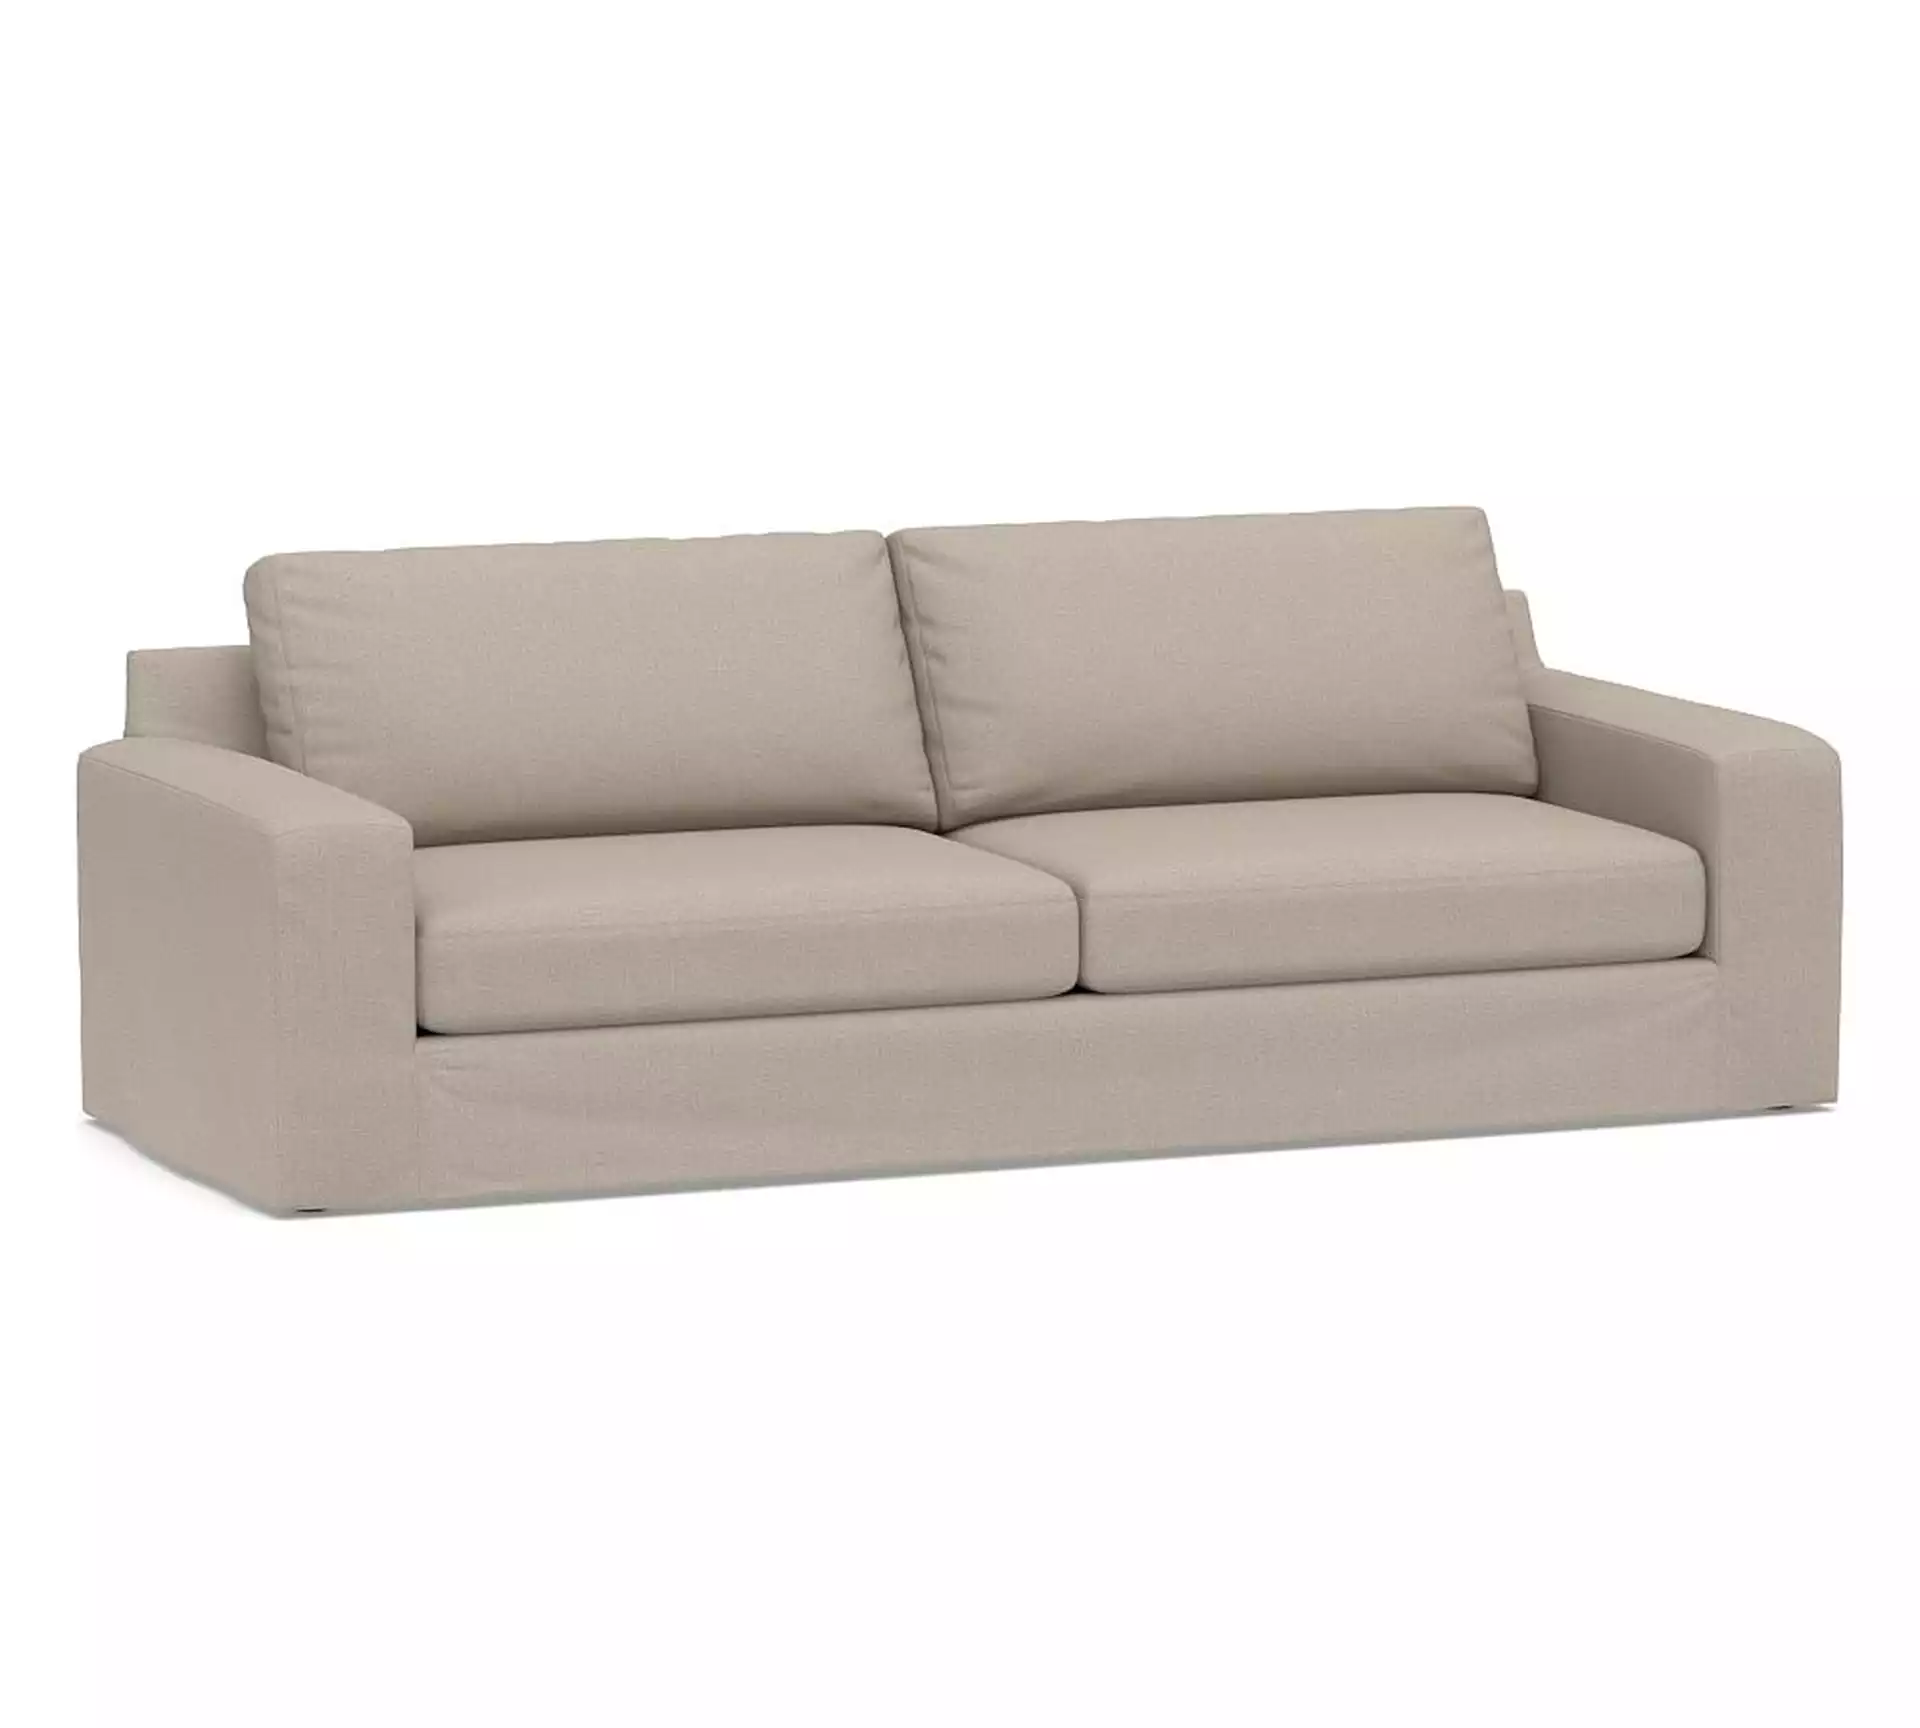 Big Sur Square Arm Slipcovered Grand Sofa 2-Seater, Down Blend Wrapped Cushions, Performance Brushed Basketweave Sand